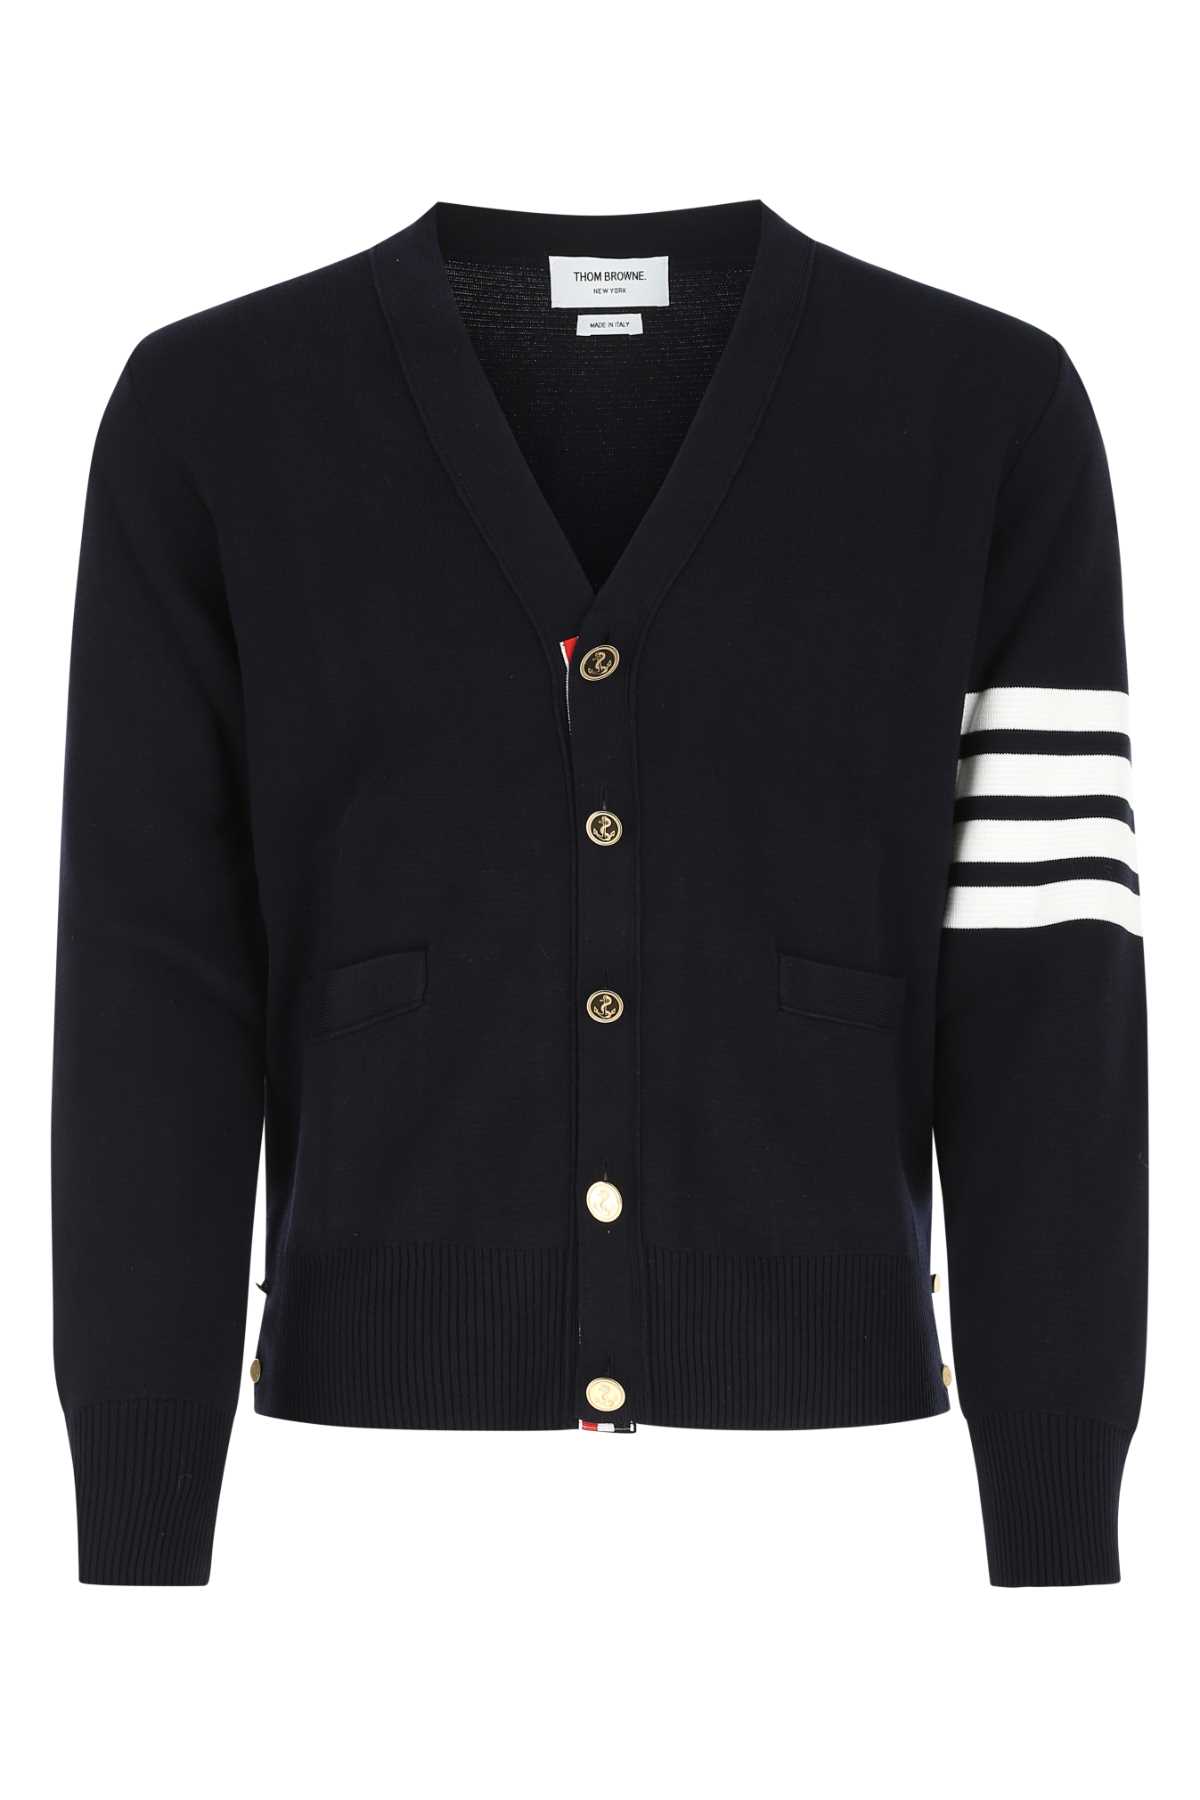 Thom Browne Navy Blue Cotton Cardigan In 415